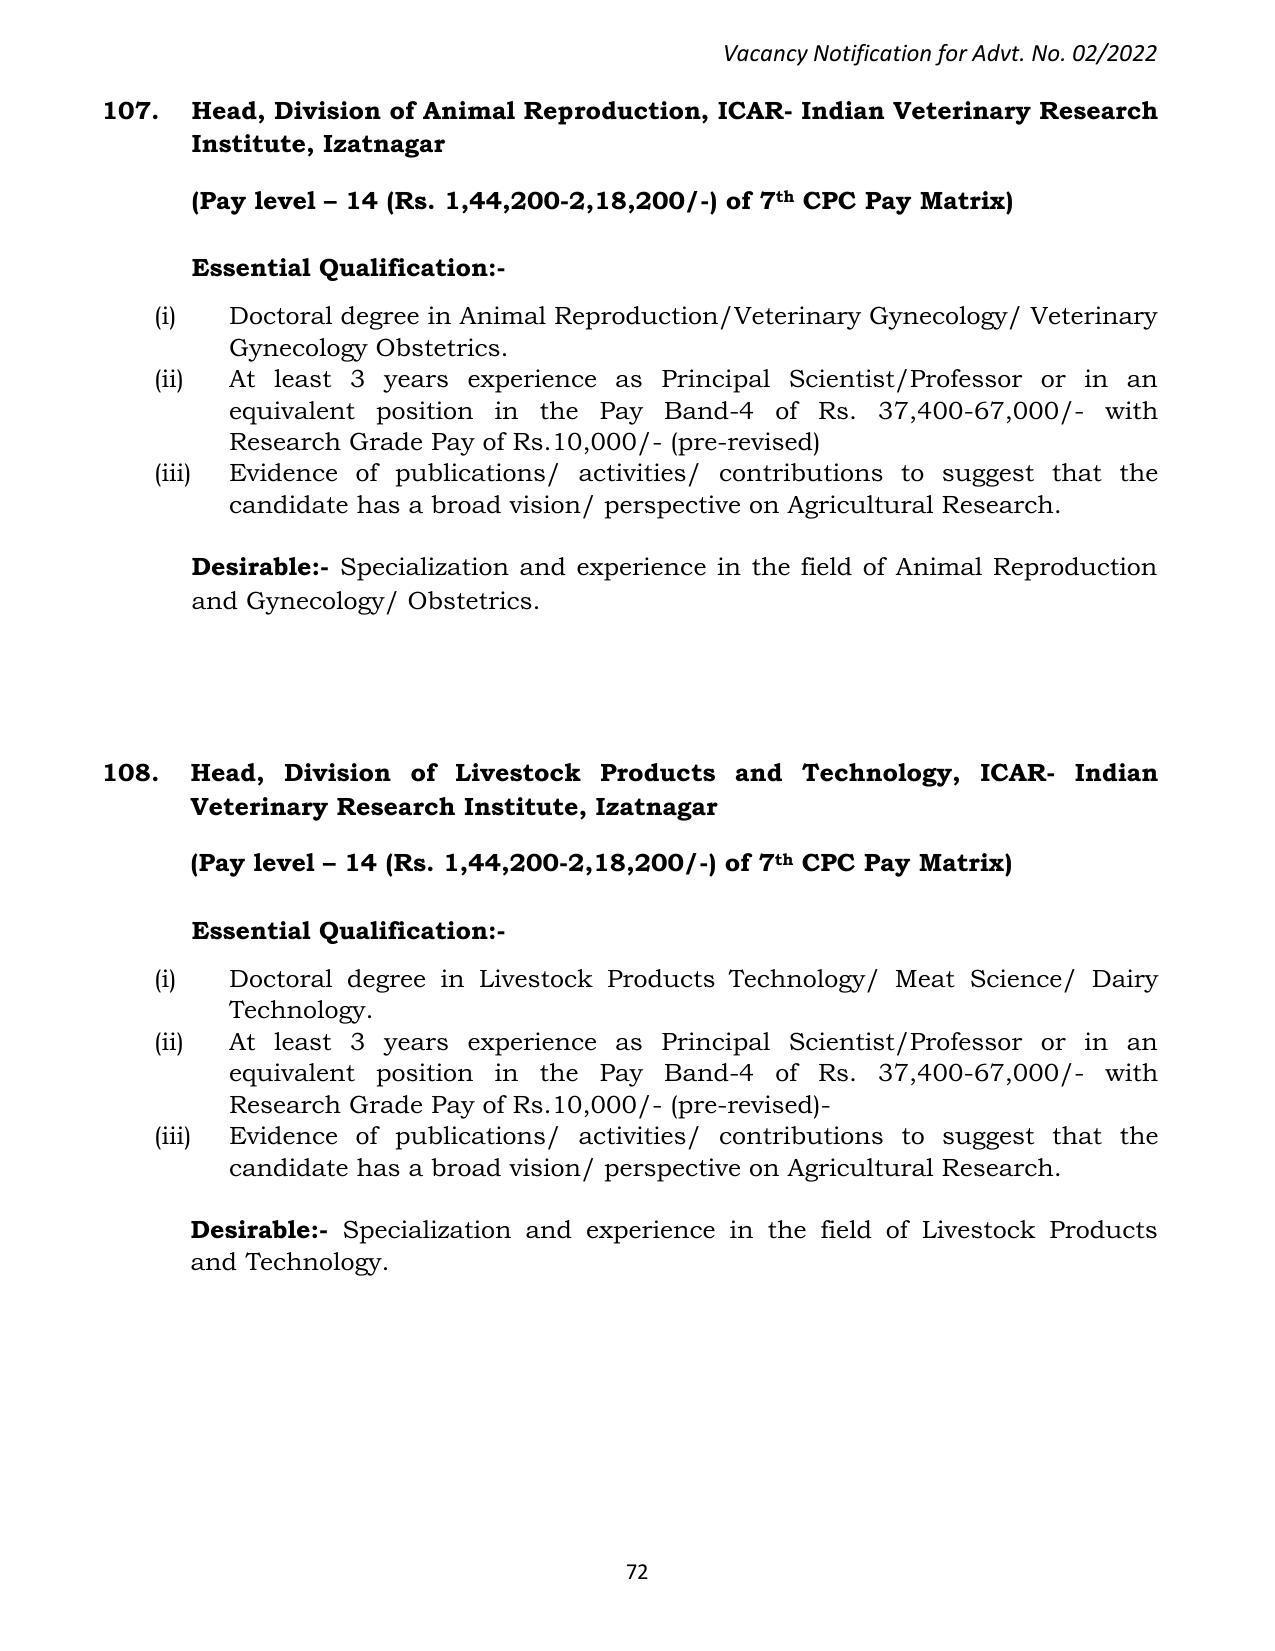 ASRB Non-Research Management Recruitment 2022 - Page 206